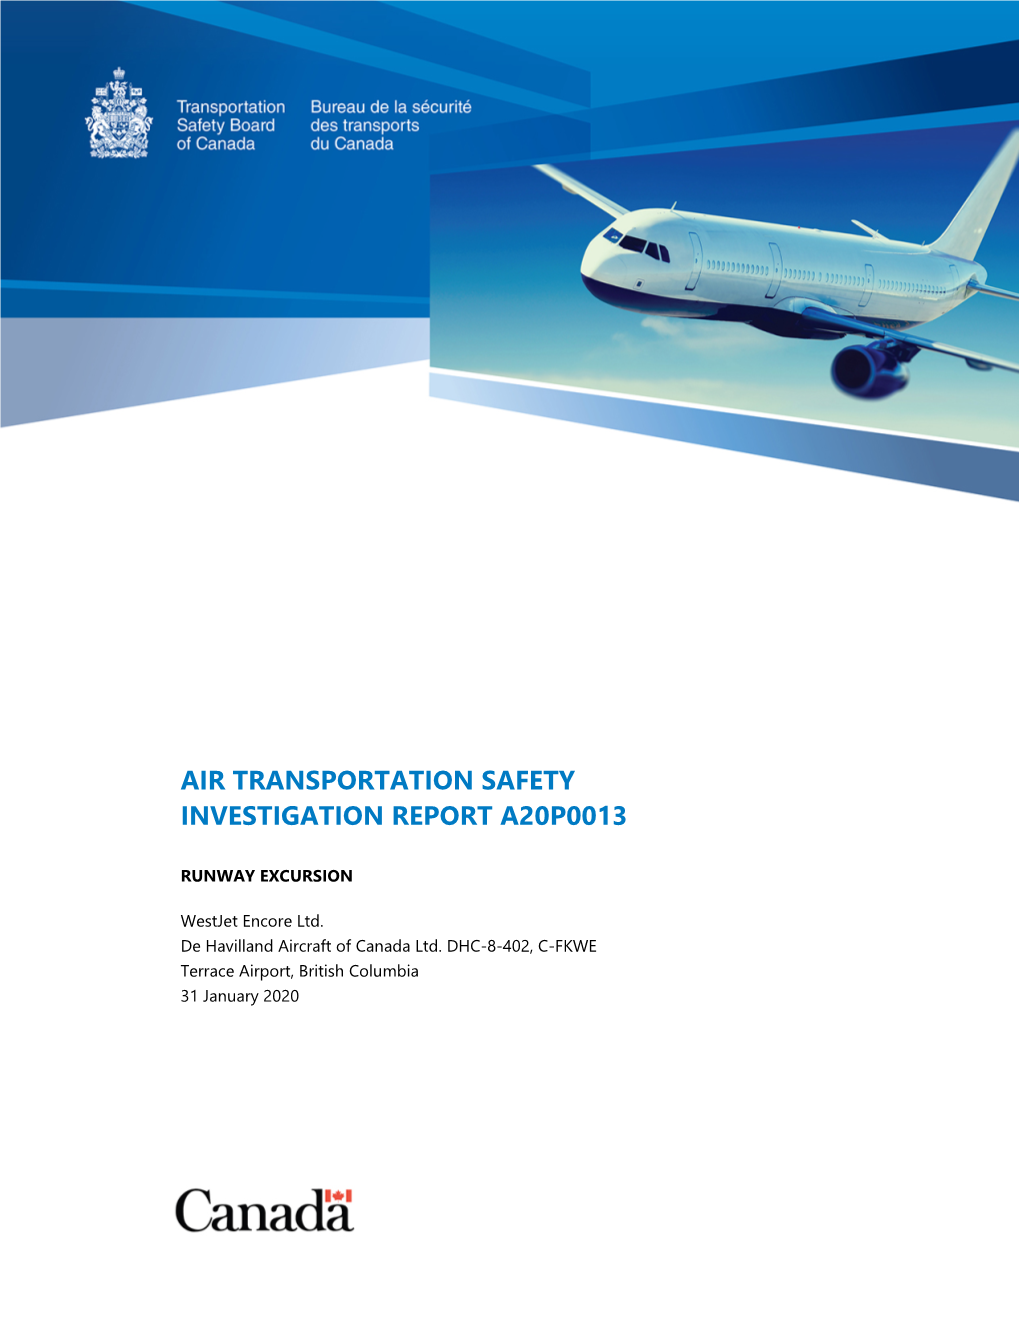 Air Transportation Safety Investigation Report A20p0013